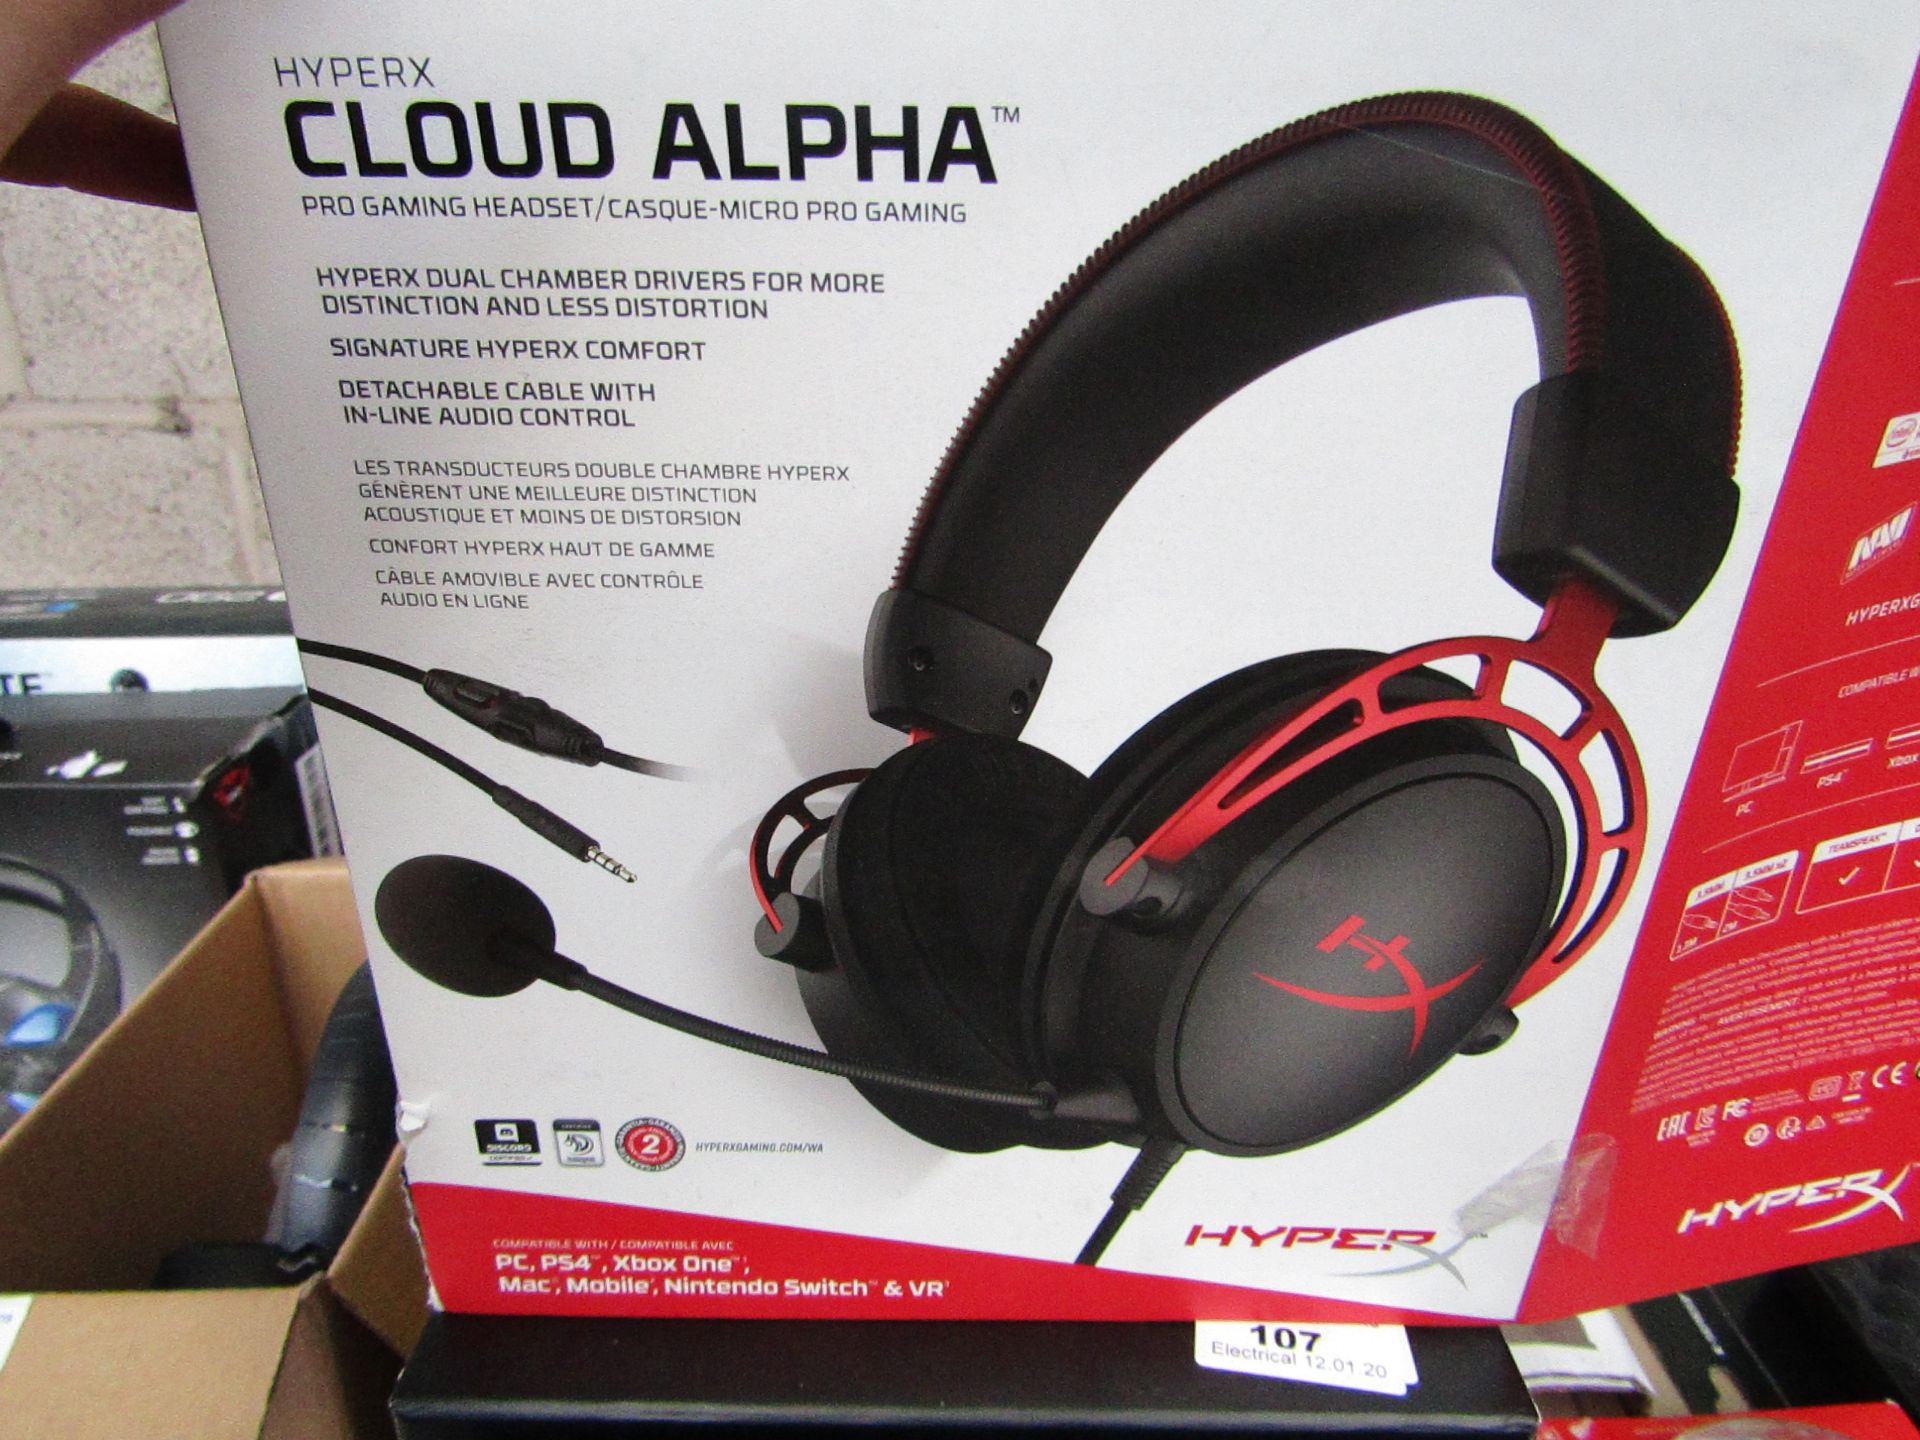 HYPER X - Cloud alpha gaming headset - Untested and boxed.